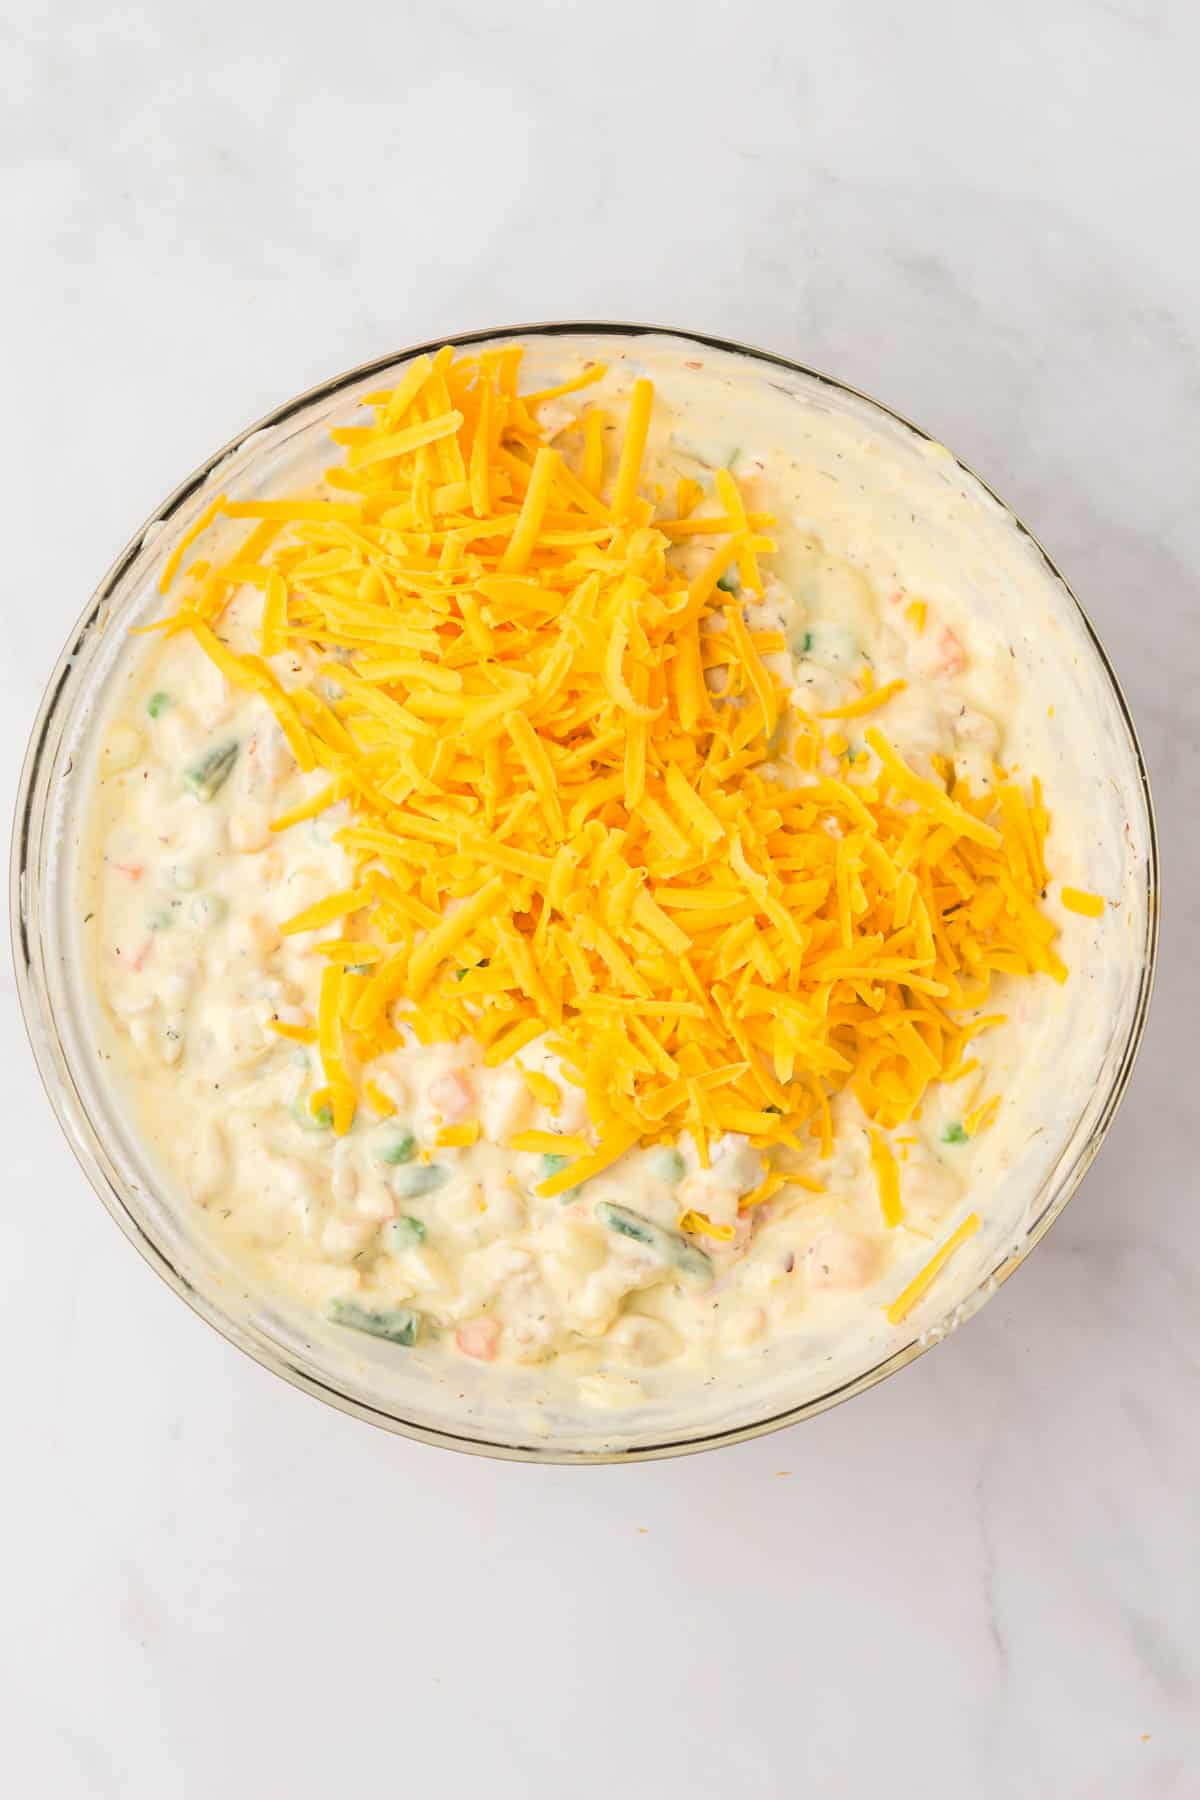 Adding shredded cheese to casserole filling.